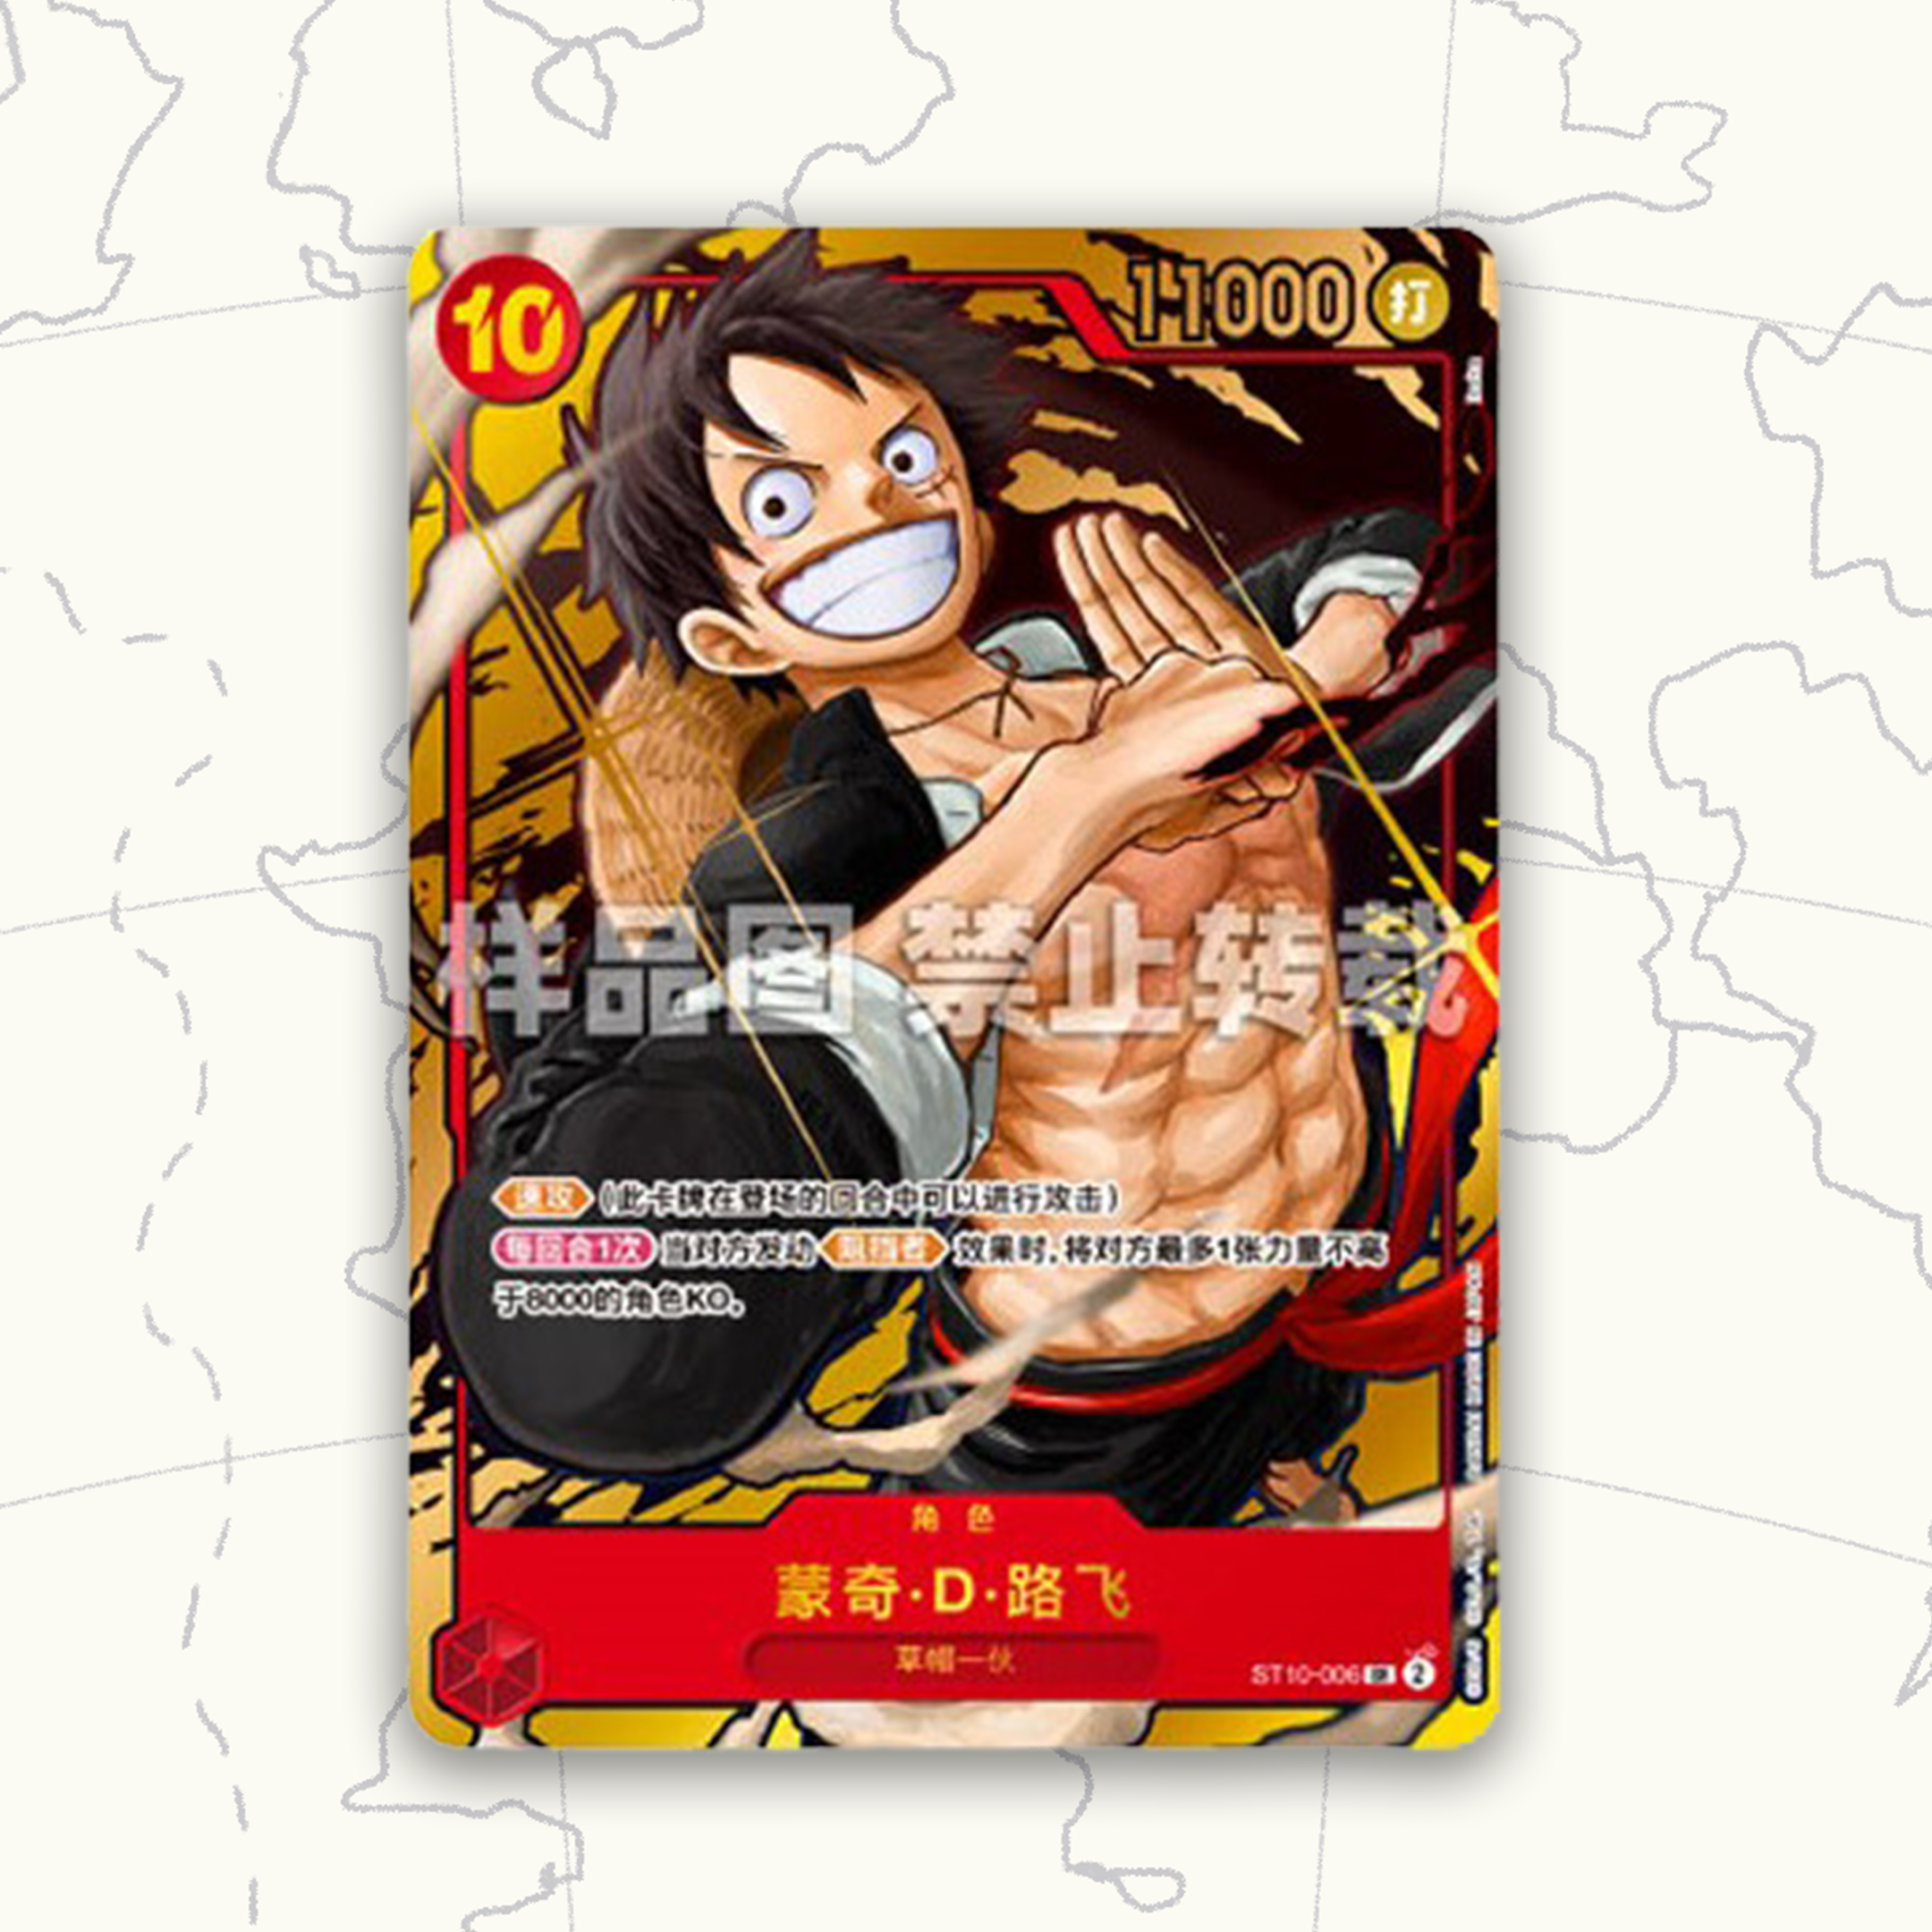 ONE PIECE CARD GAME - Chinese 1st Anniversary Limited Edition Promo Card - Luffy ST10-006